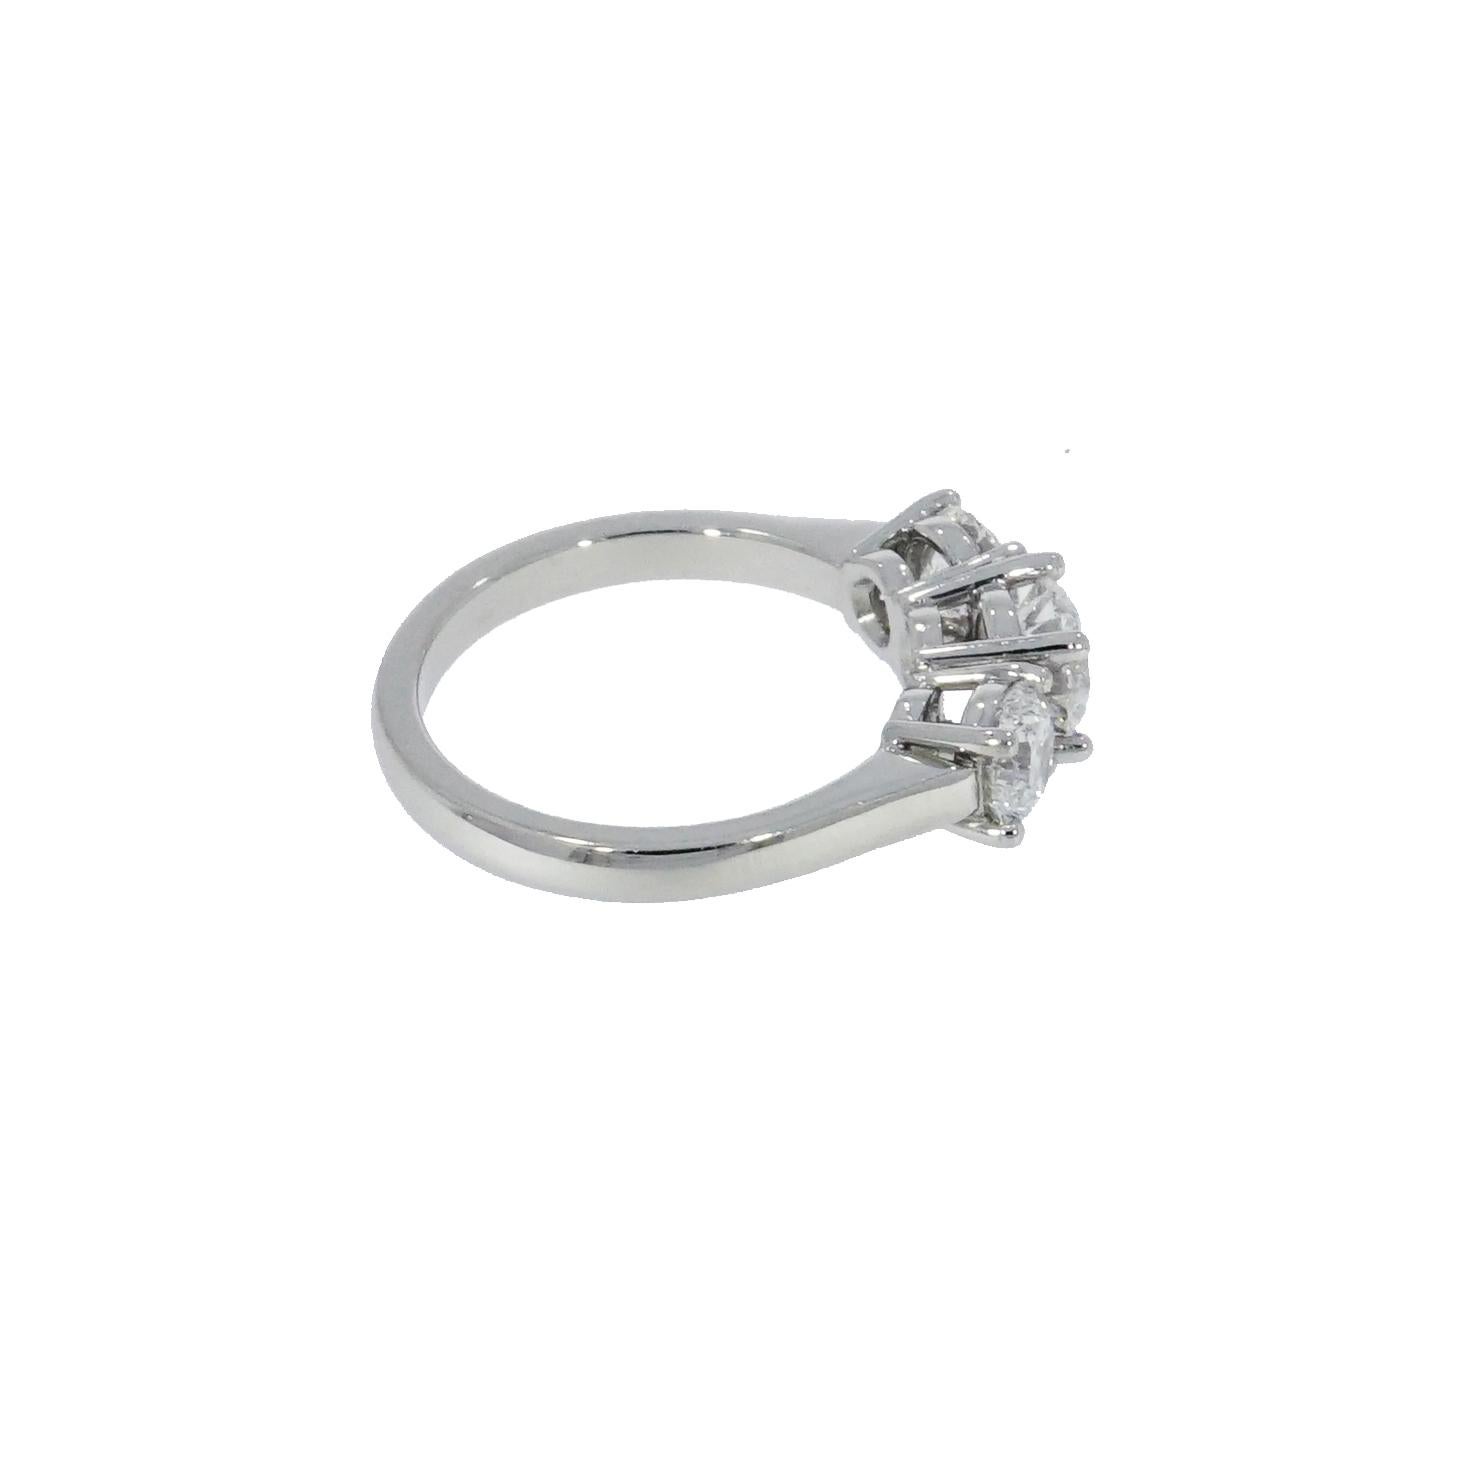 This three stone engagement ring features a 0.70 carat round brilliant cut center, E color, VVS2 clarity and is flanked by a 0.50 carat round diamond on each side, both in the same color and clarity as the center diamond. 
The Diamonds are set on a